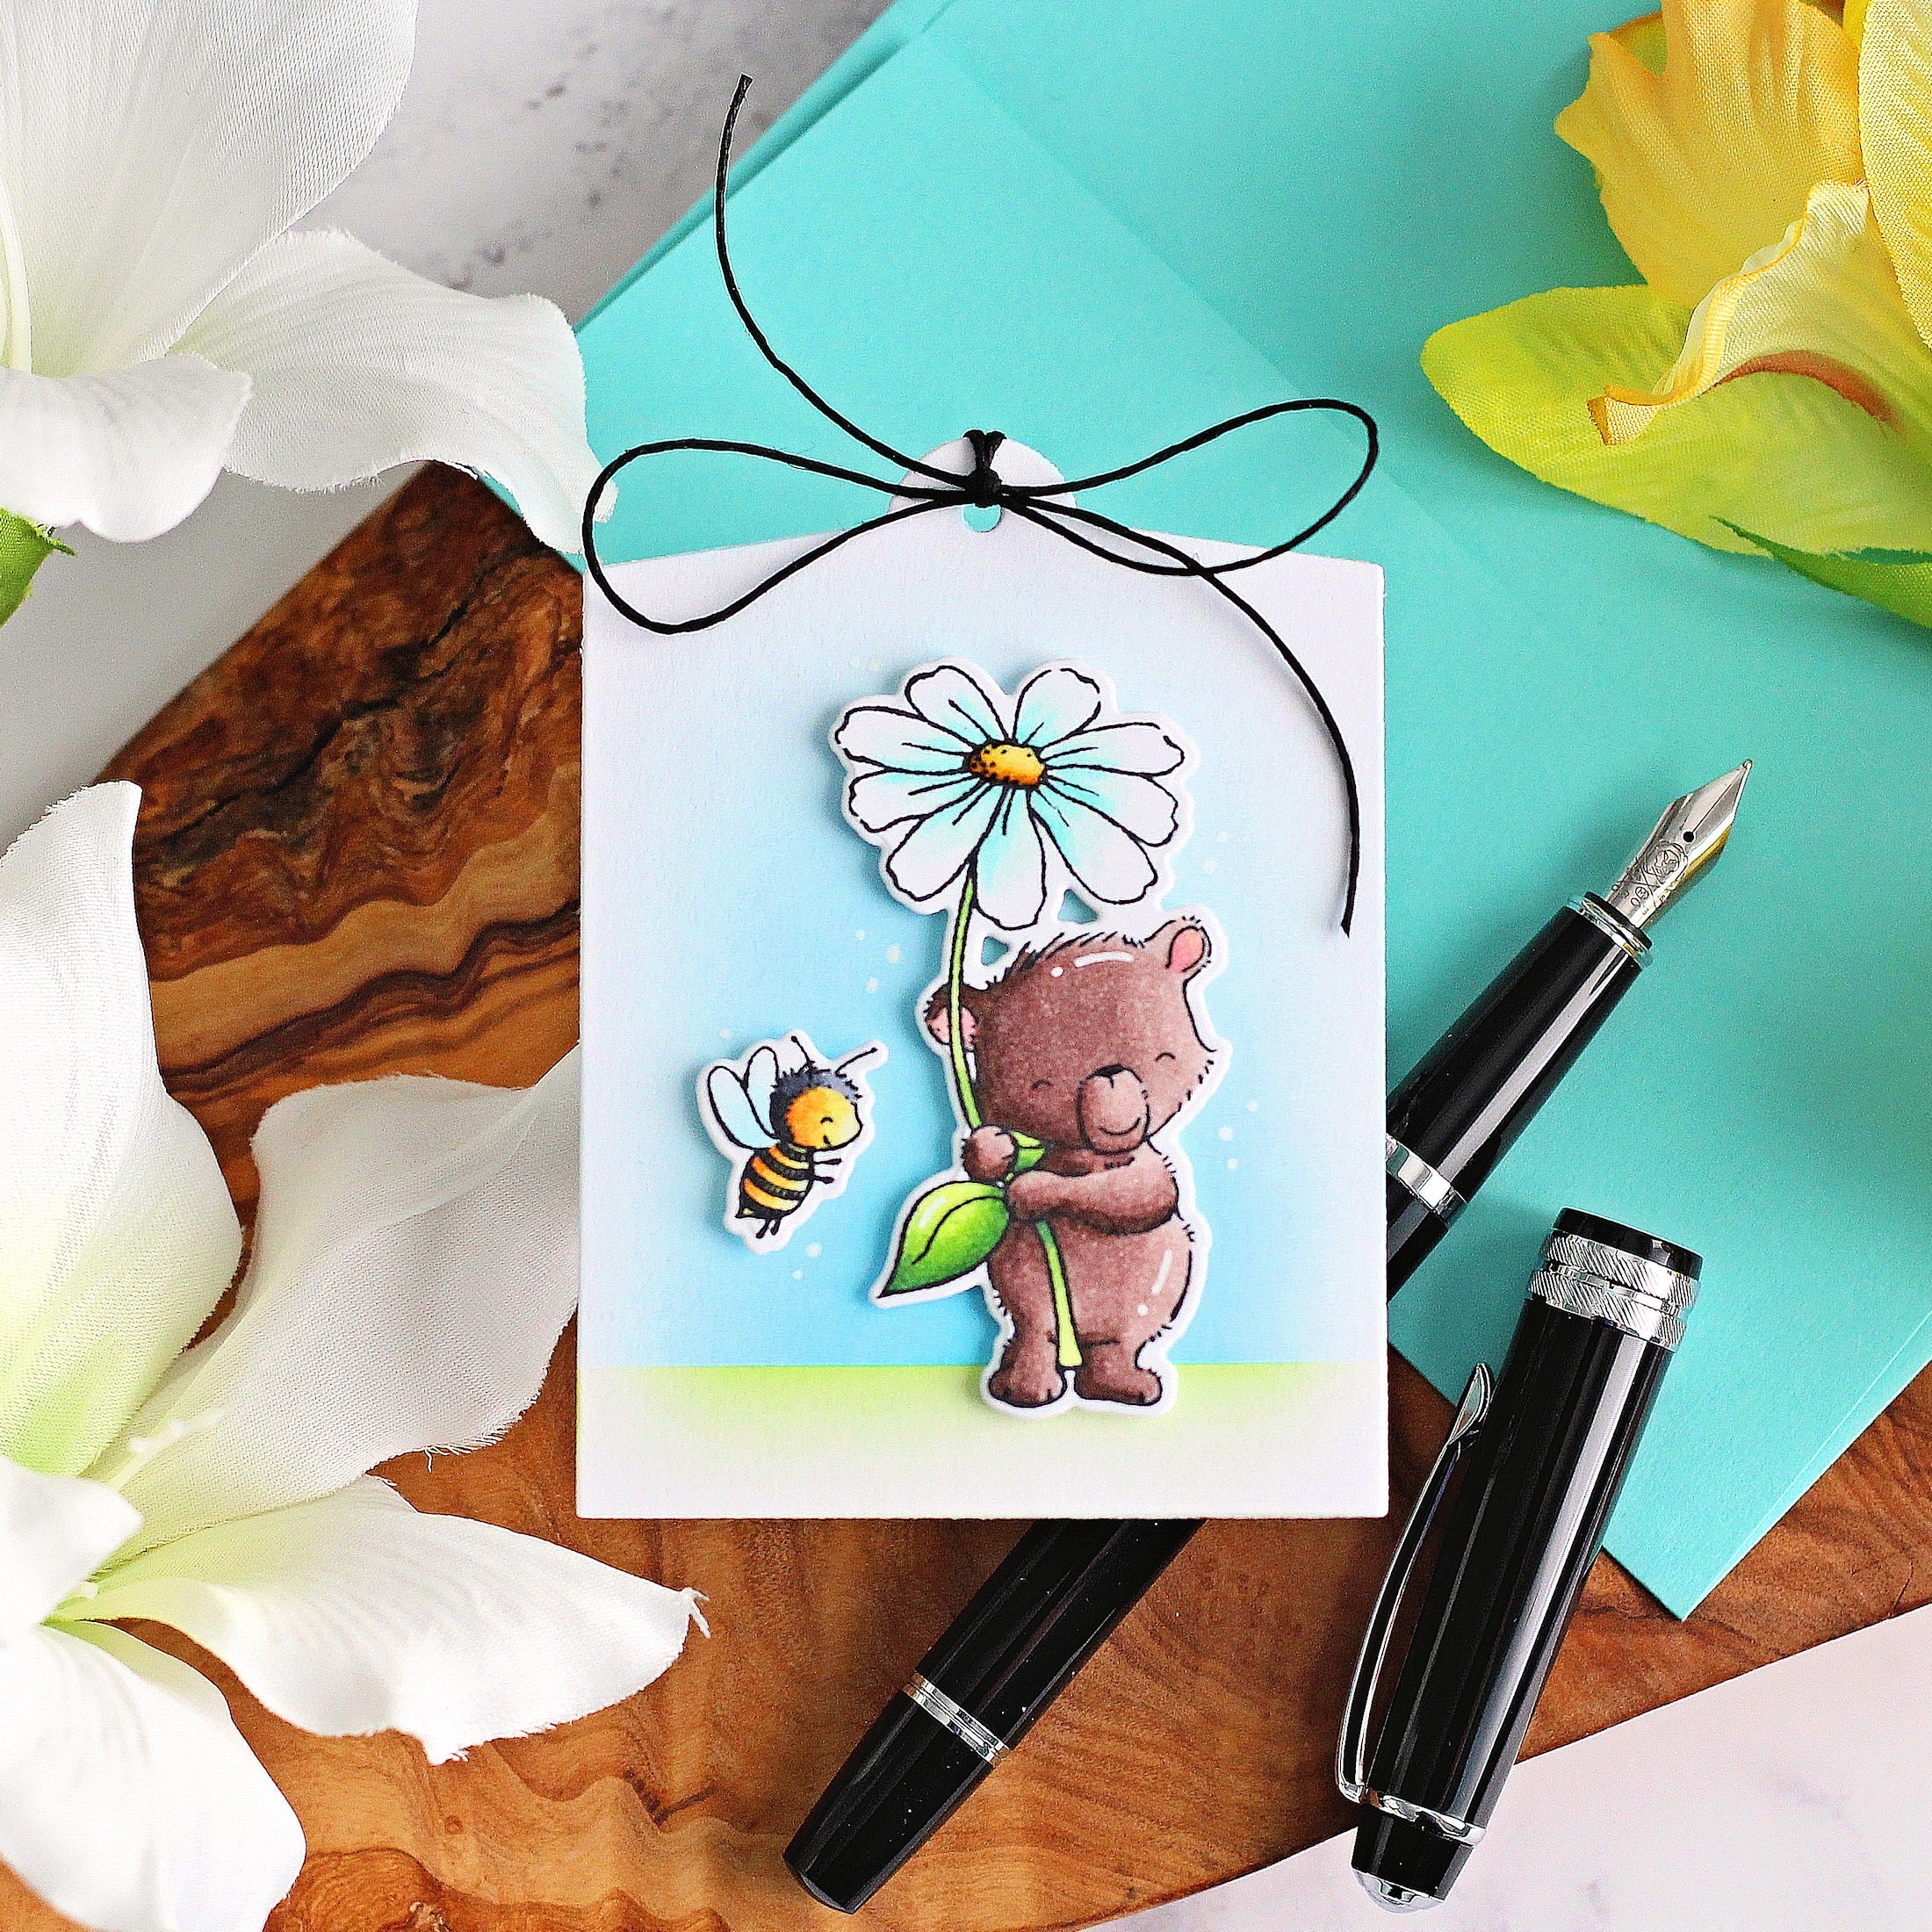 Handmade tag from Michelle Short featuring products from My Favorite Things #mftstamps